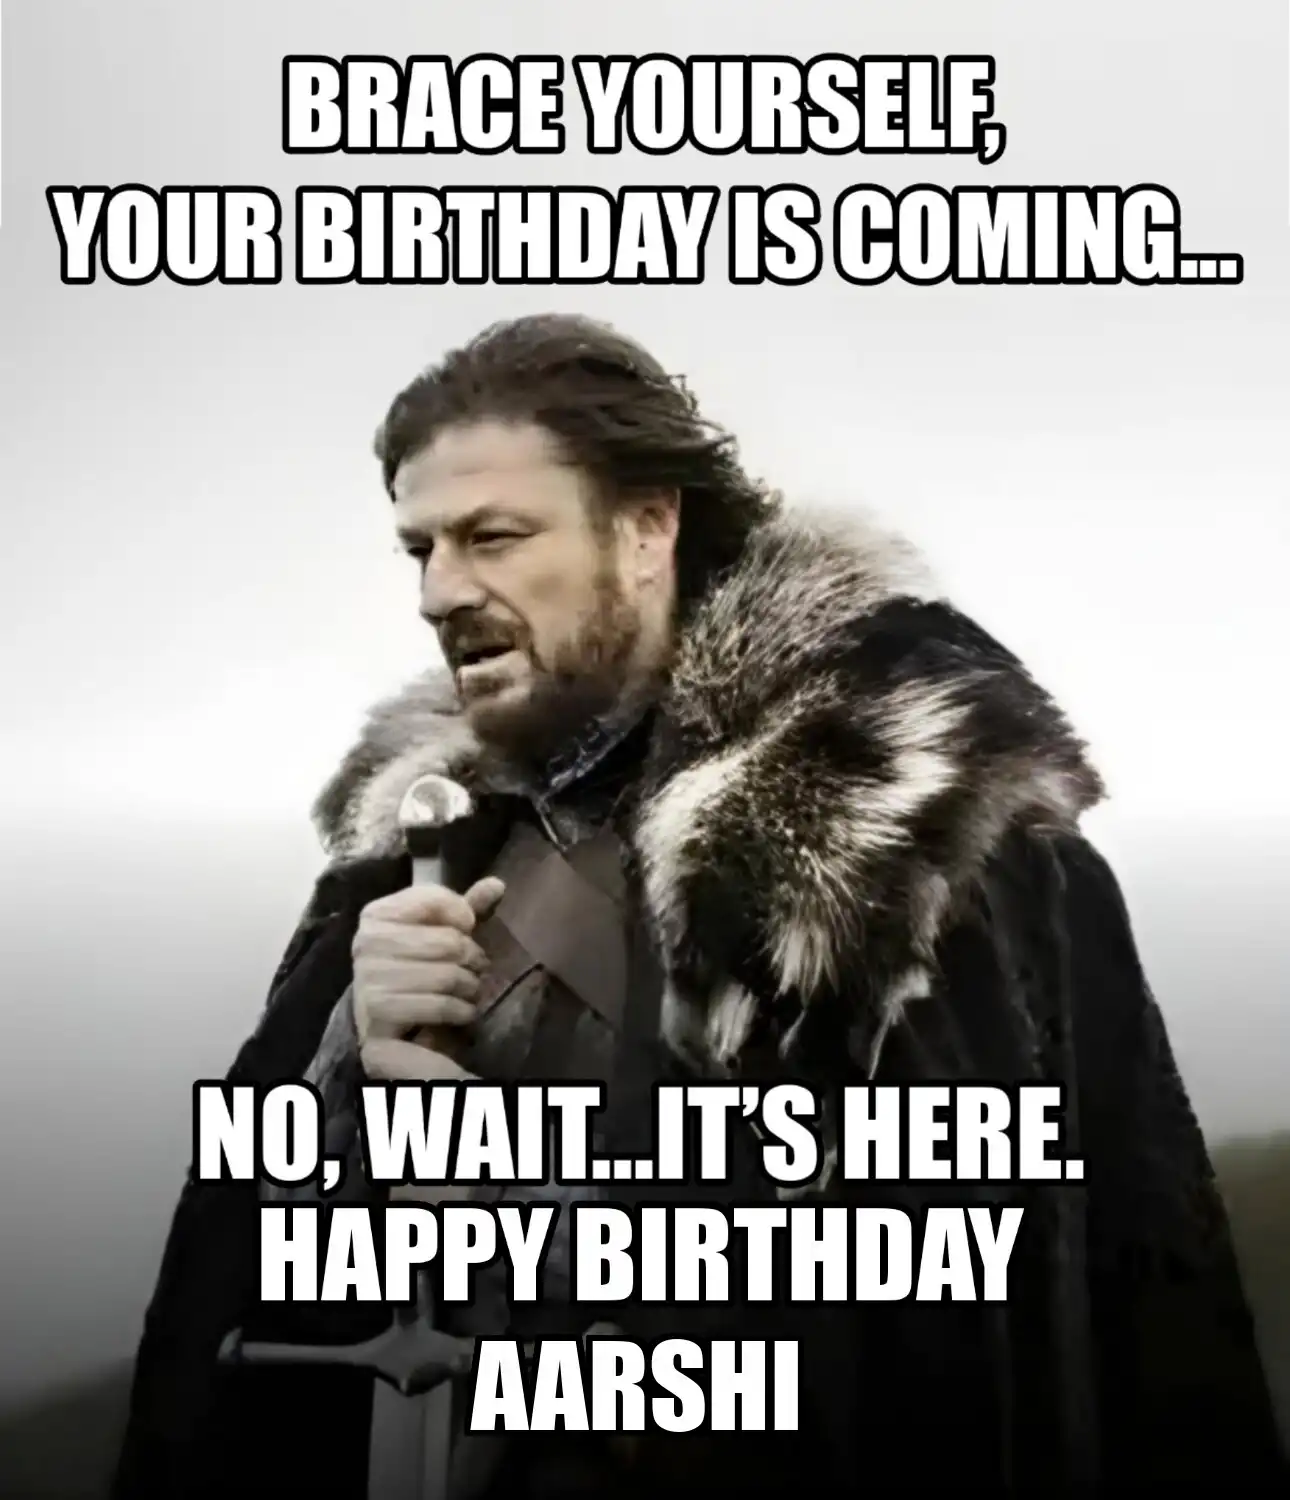 Happy Birthday Aarshi Brace Yourself Your Birthday Is Coming Meme